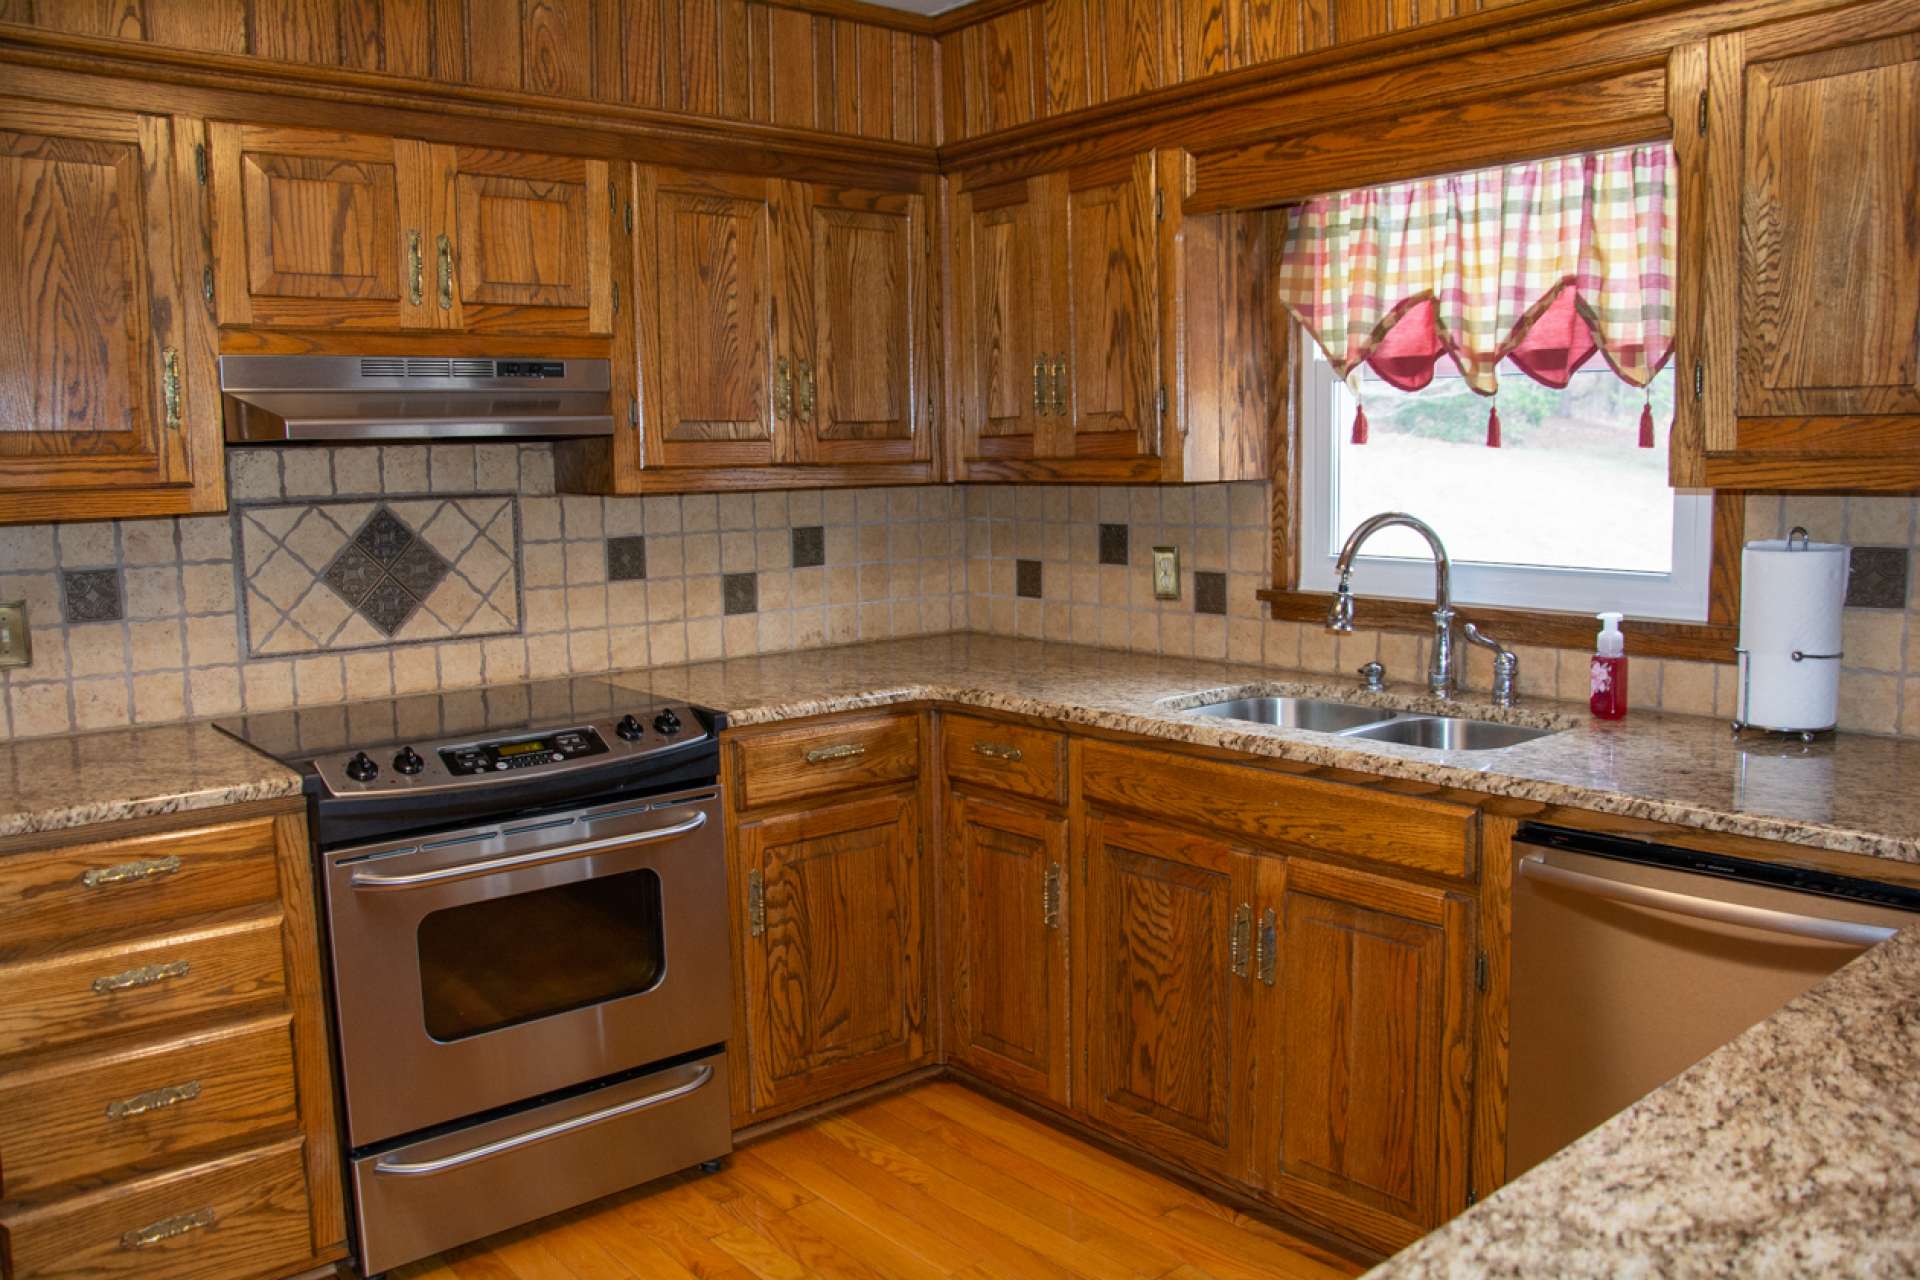 Kitchen features custom-built oak cabinetry, granite counter tops and stainless appliances.